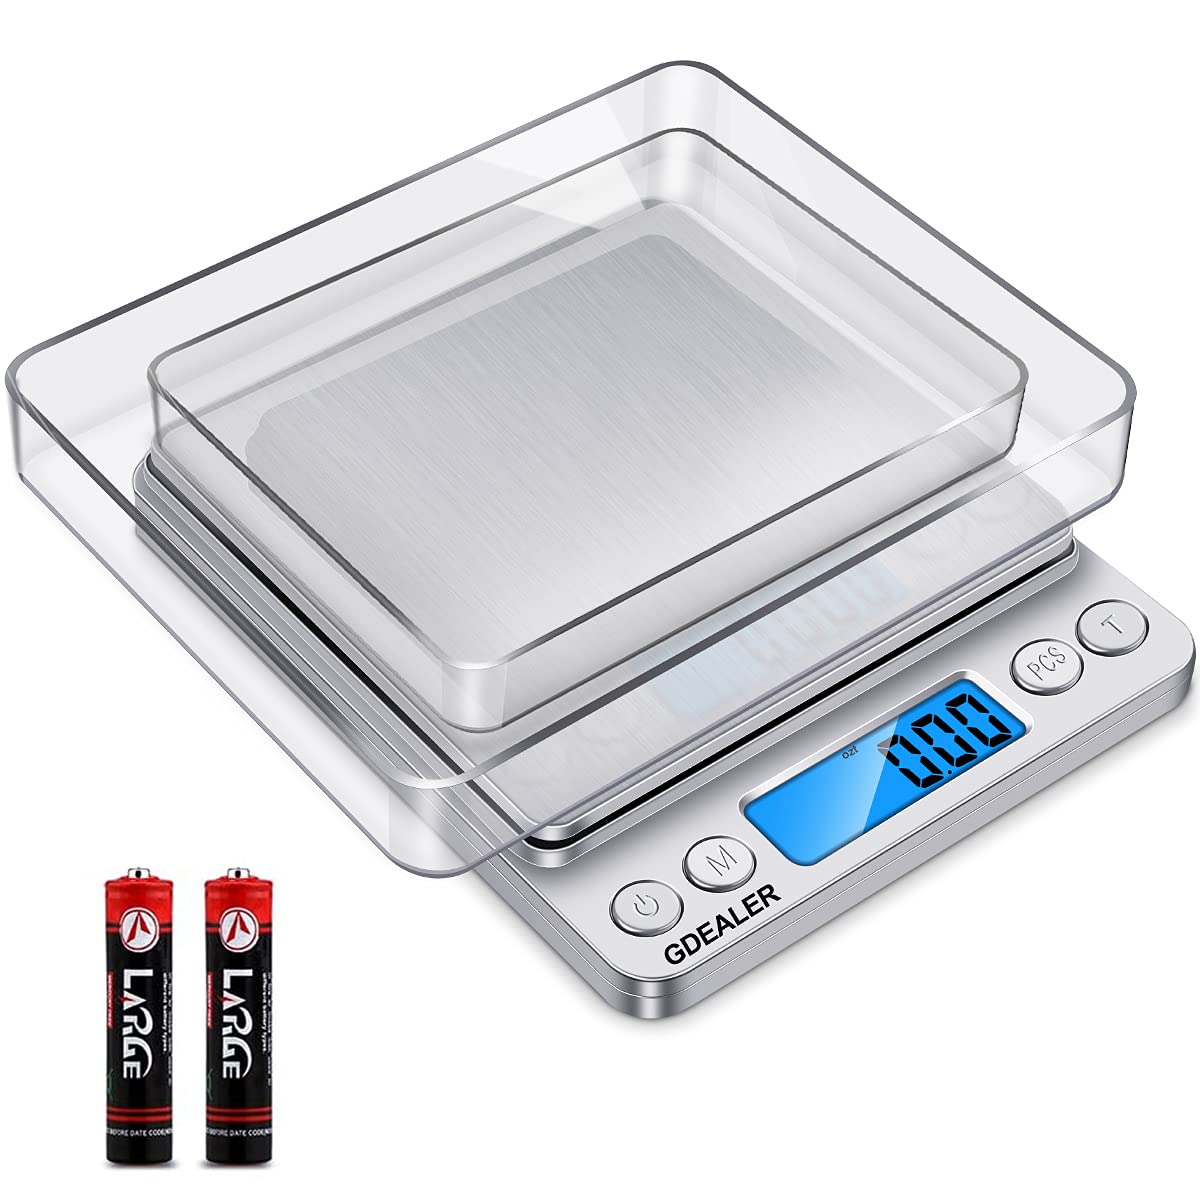 GDEALER Digital Kitchen Scale 3000g/0.1g Precise Food Scale Gram Scales Weight Food Coffee Scale,Silver